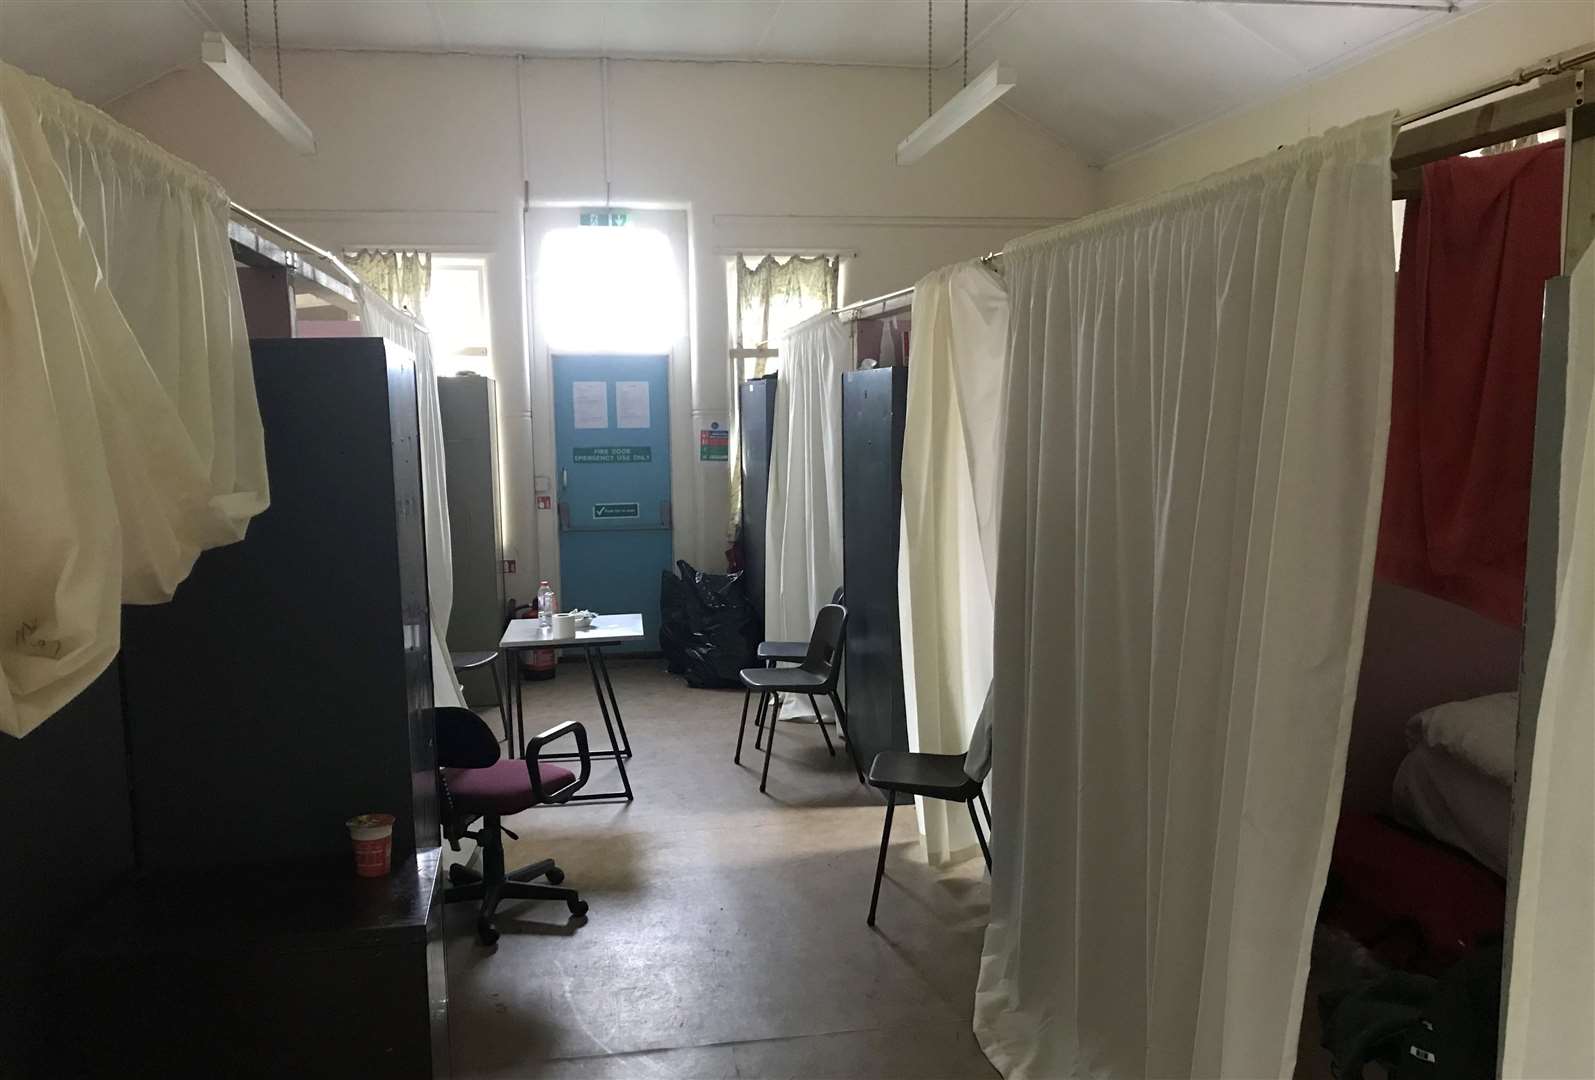 Conditions inside Napier Barracks in Folkestone.  Photo: Independent Chief Inspector of Borders and Immigration